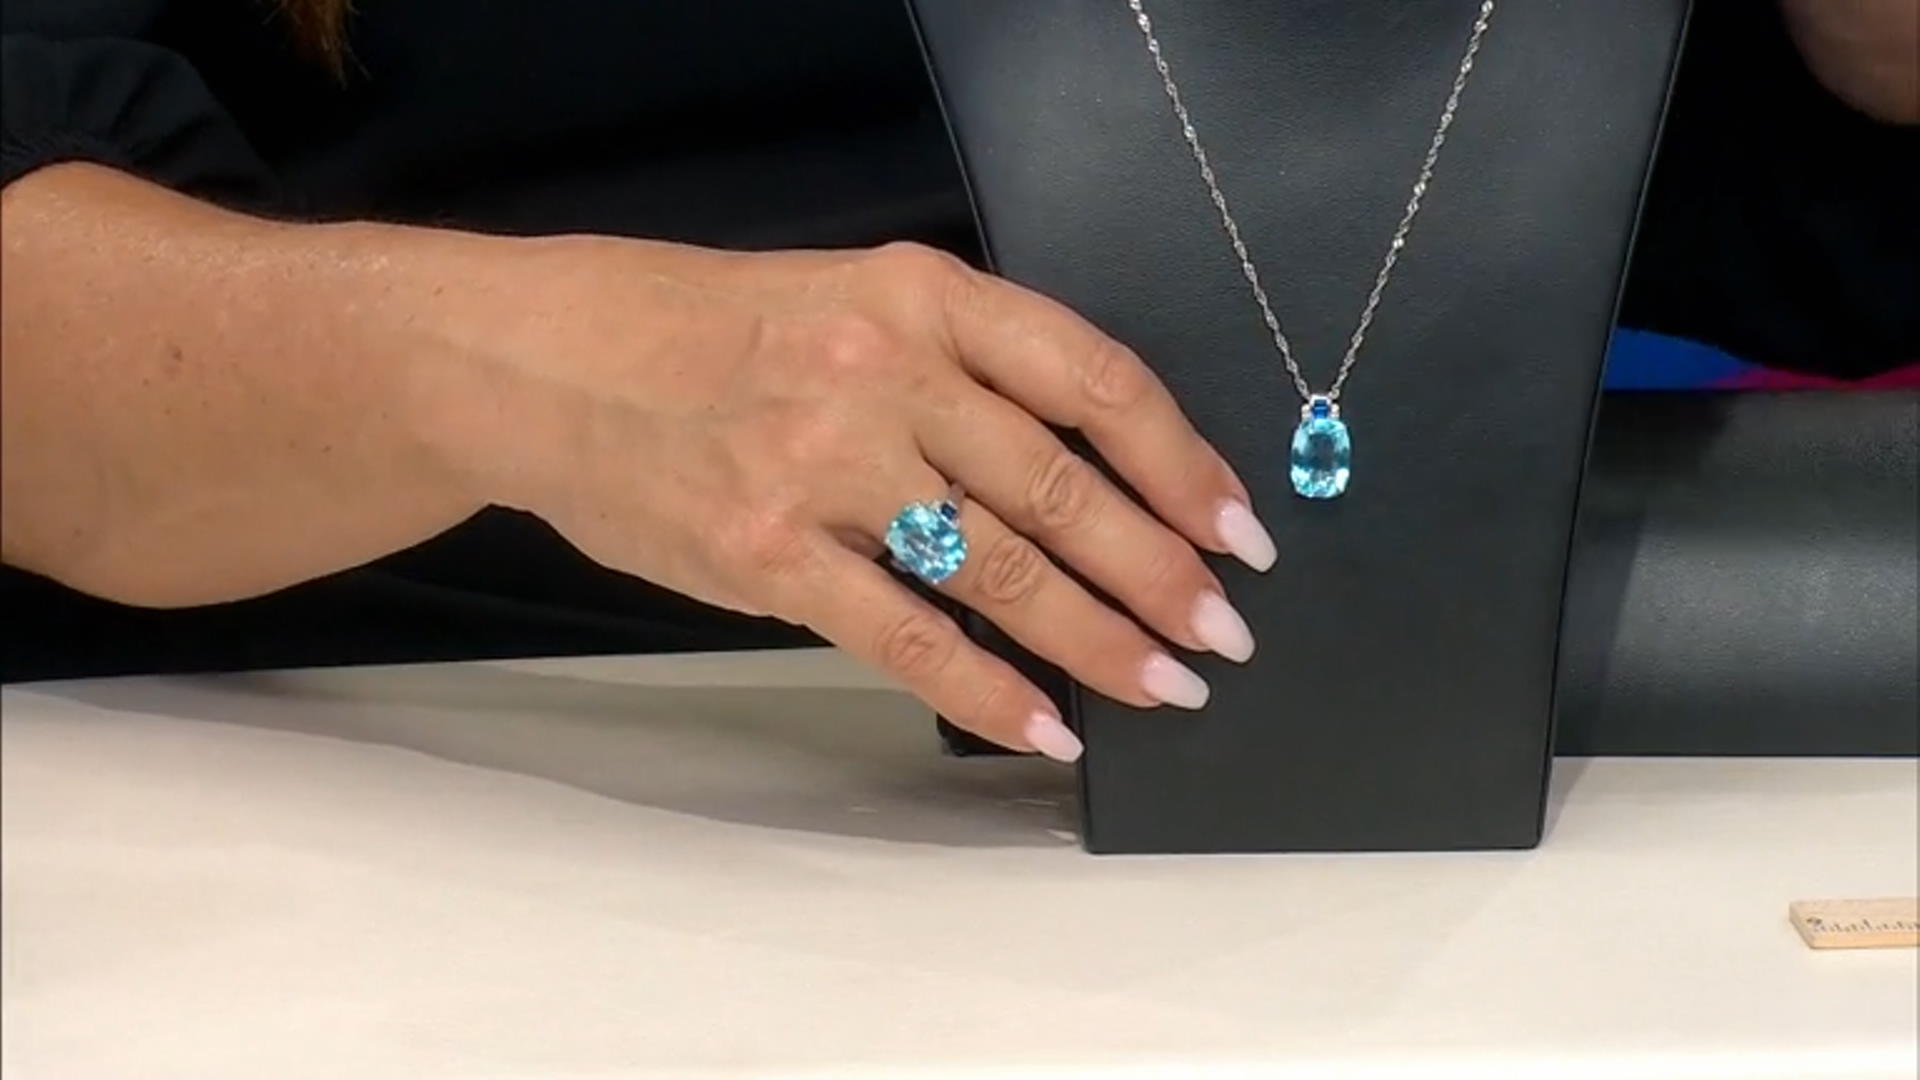 Sky Blue Topaz, Lab Blue Spinel & Lab White Sapphire Rhodium Over Sterling Silver Ring 10.75ctw Video Thumbnail